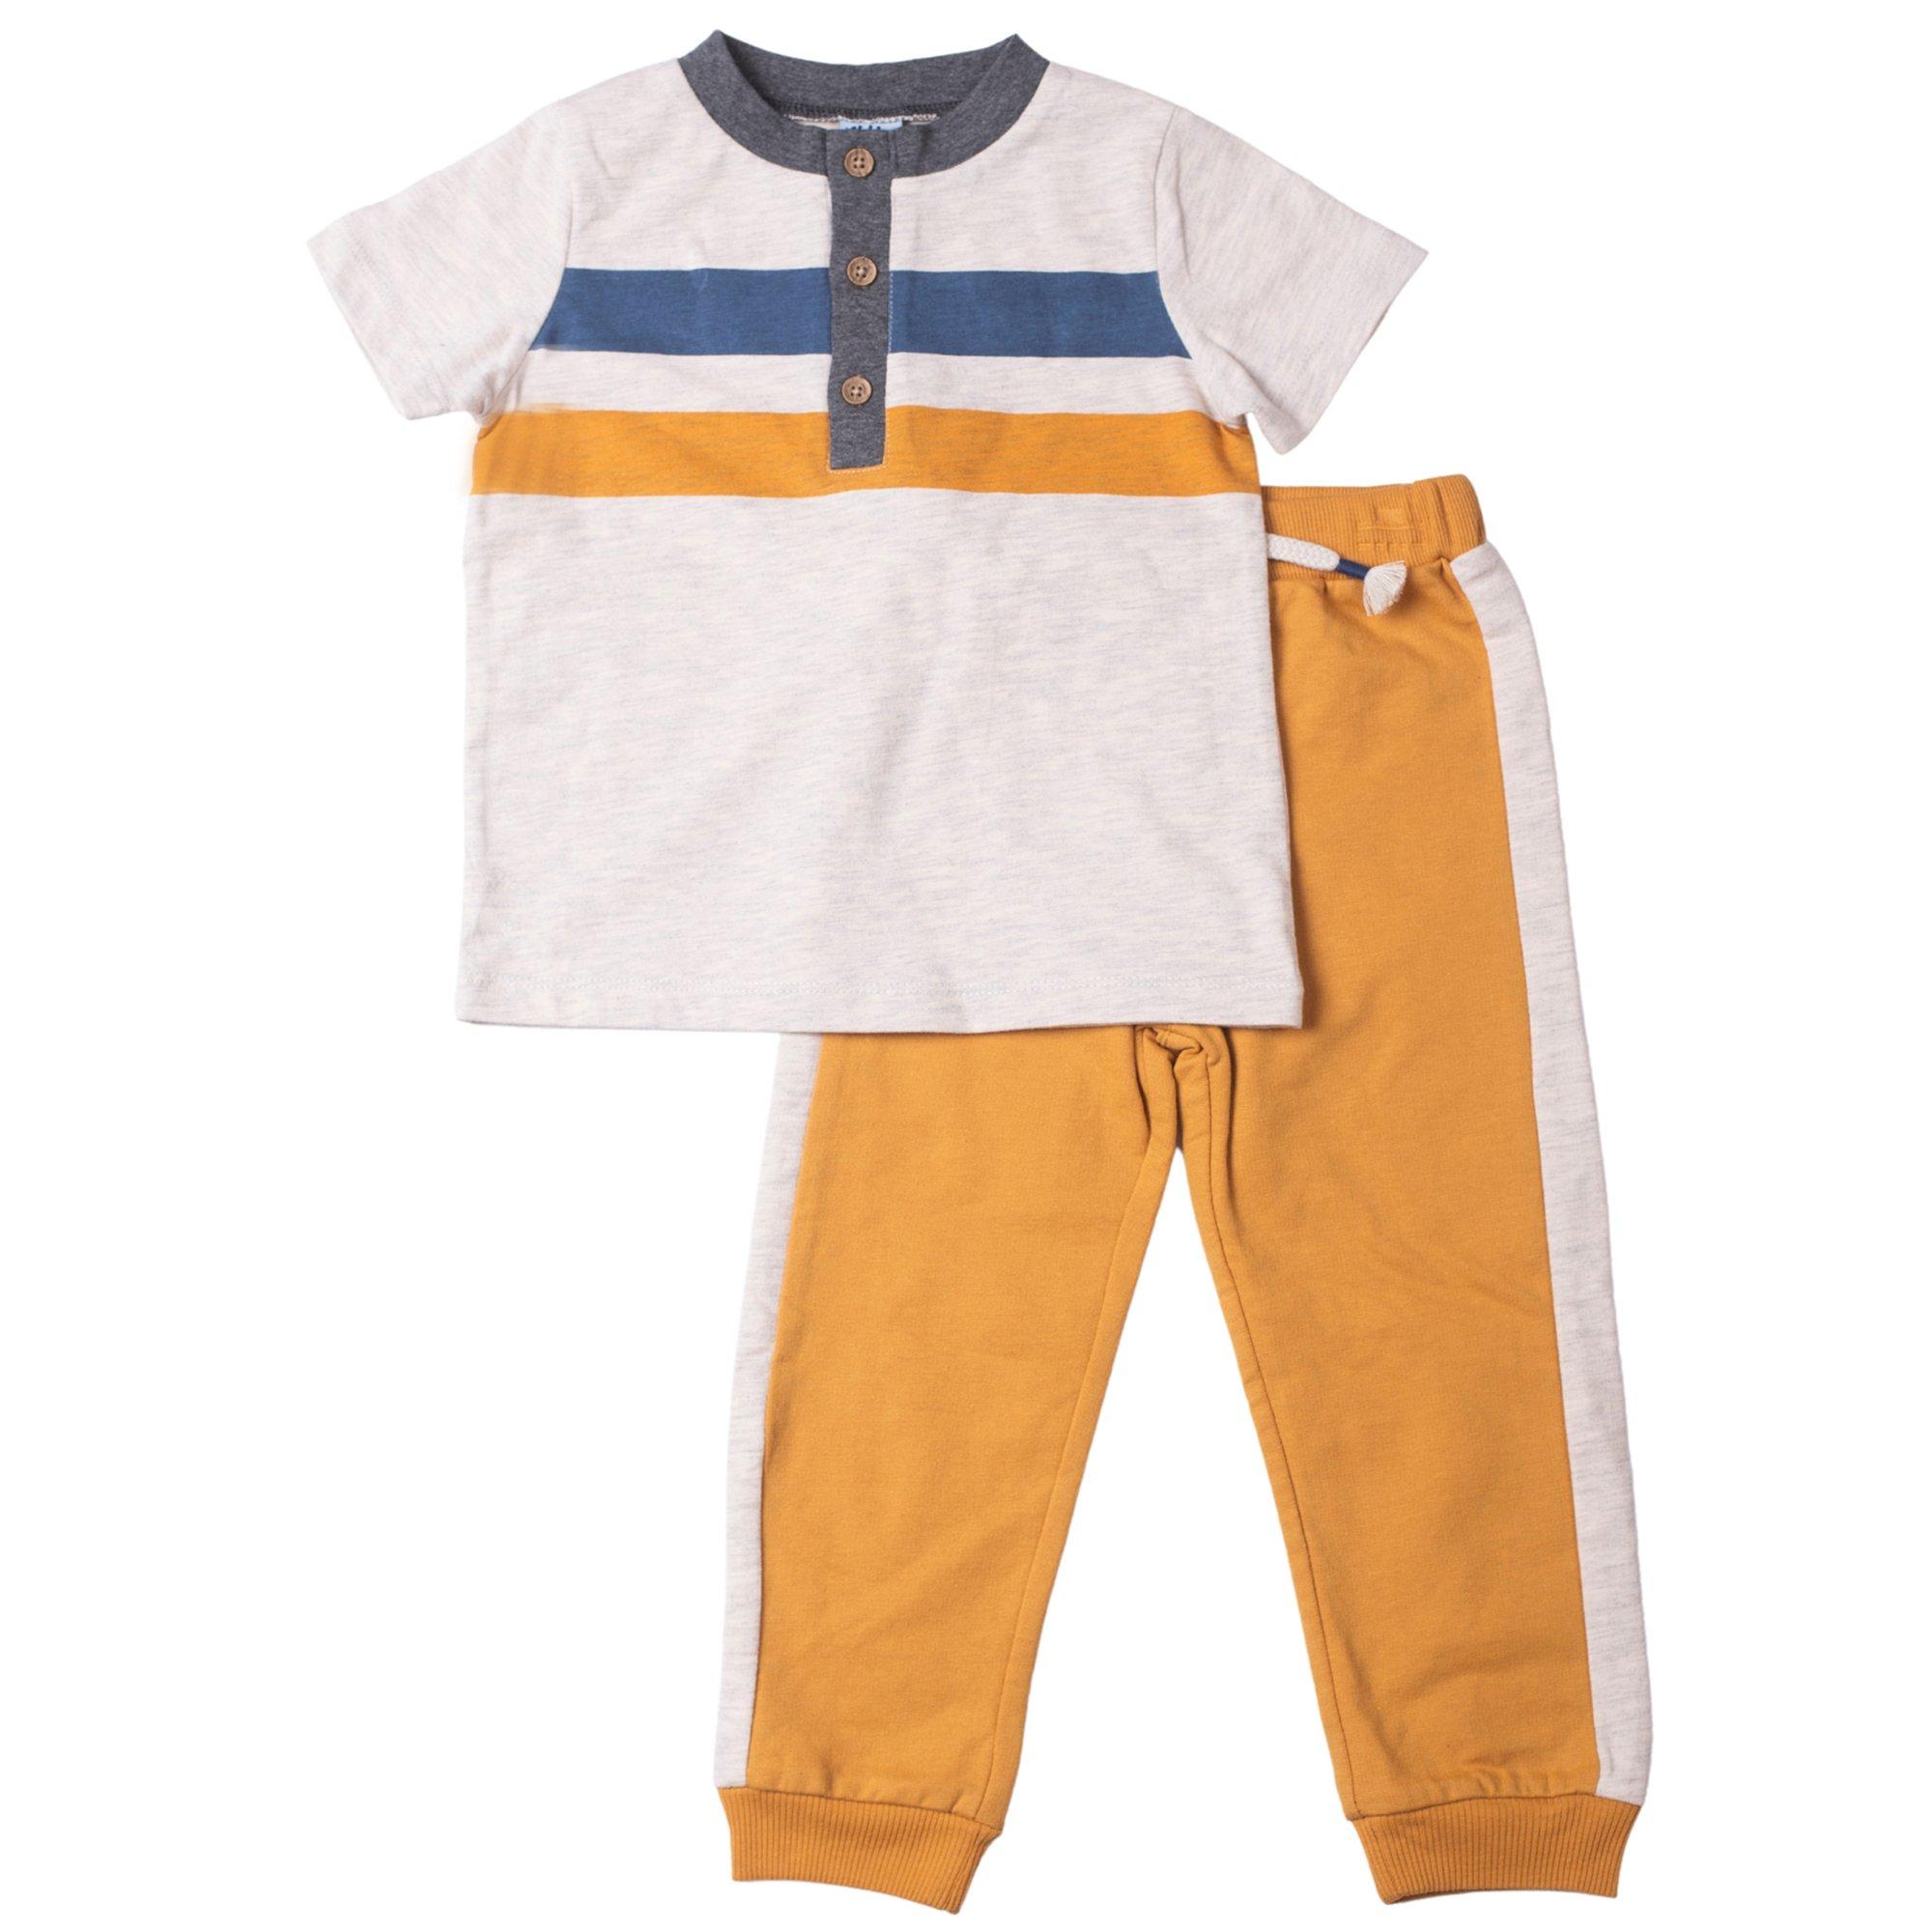 Little Lad Toddler Boys 2-Pc. Stripe Tee And